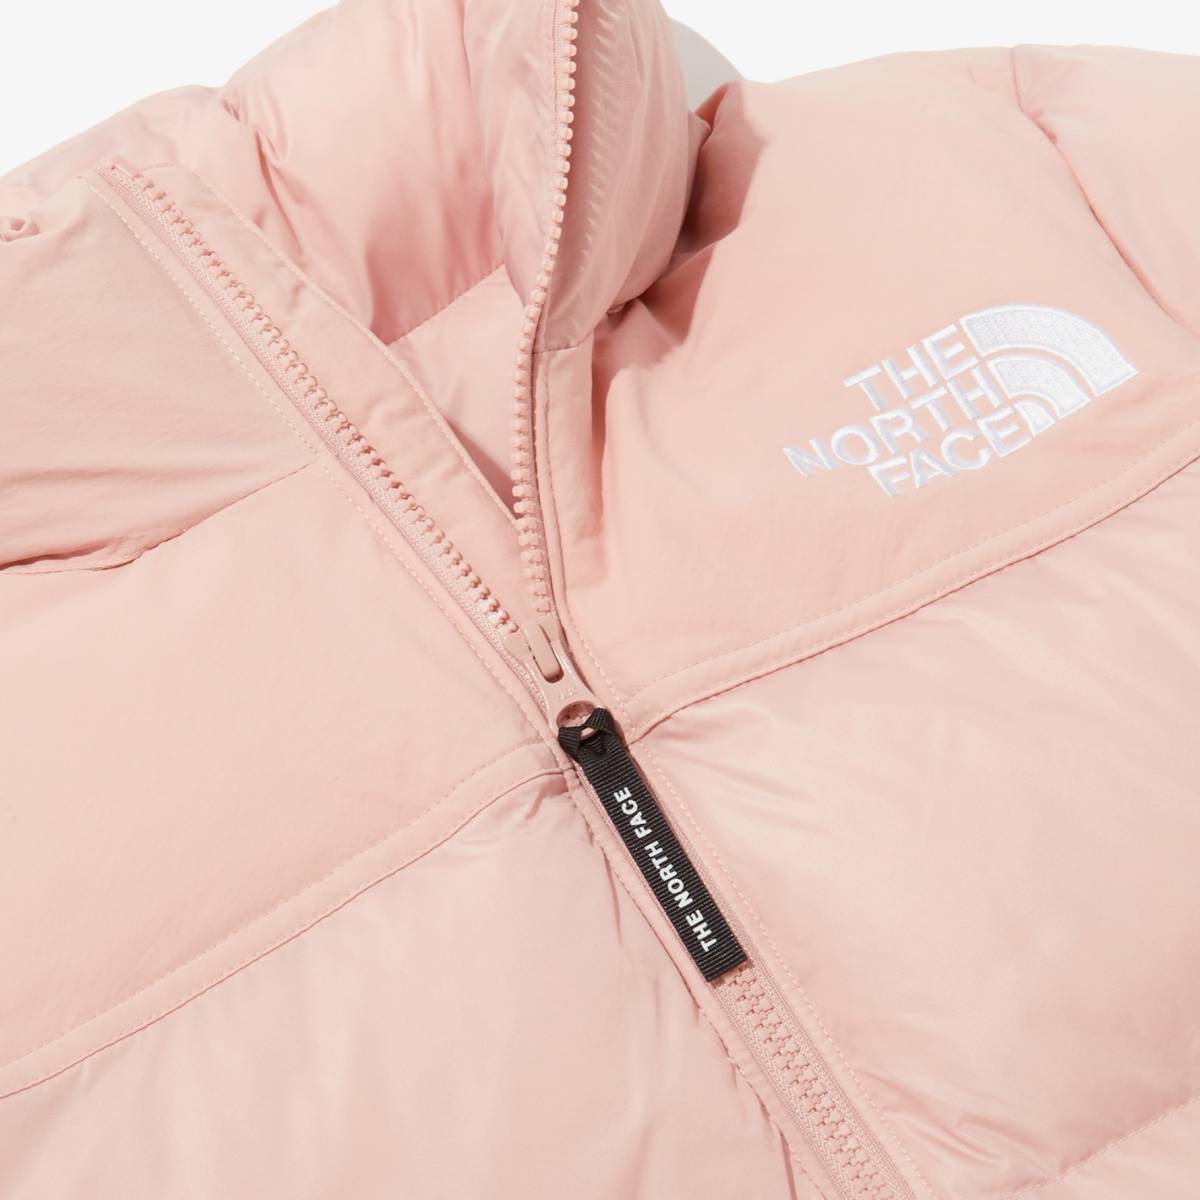  North Face #S#np Zion ball down jacket tag equipped regular goods limitation number lady's *wi men's NUPTSE ON BALL JACKET